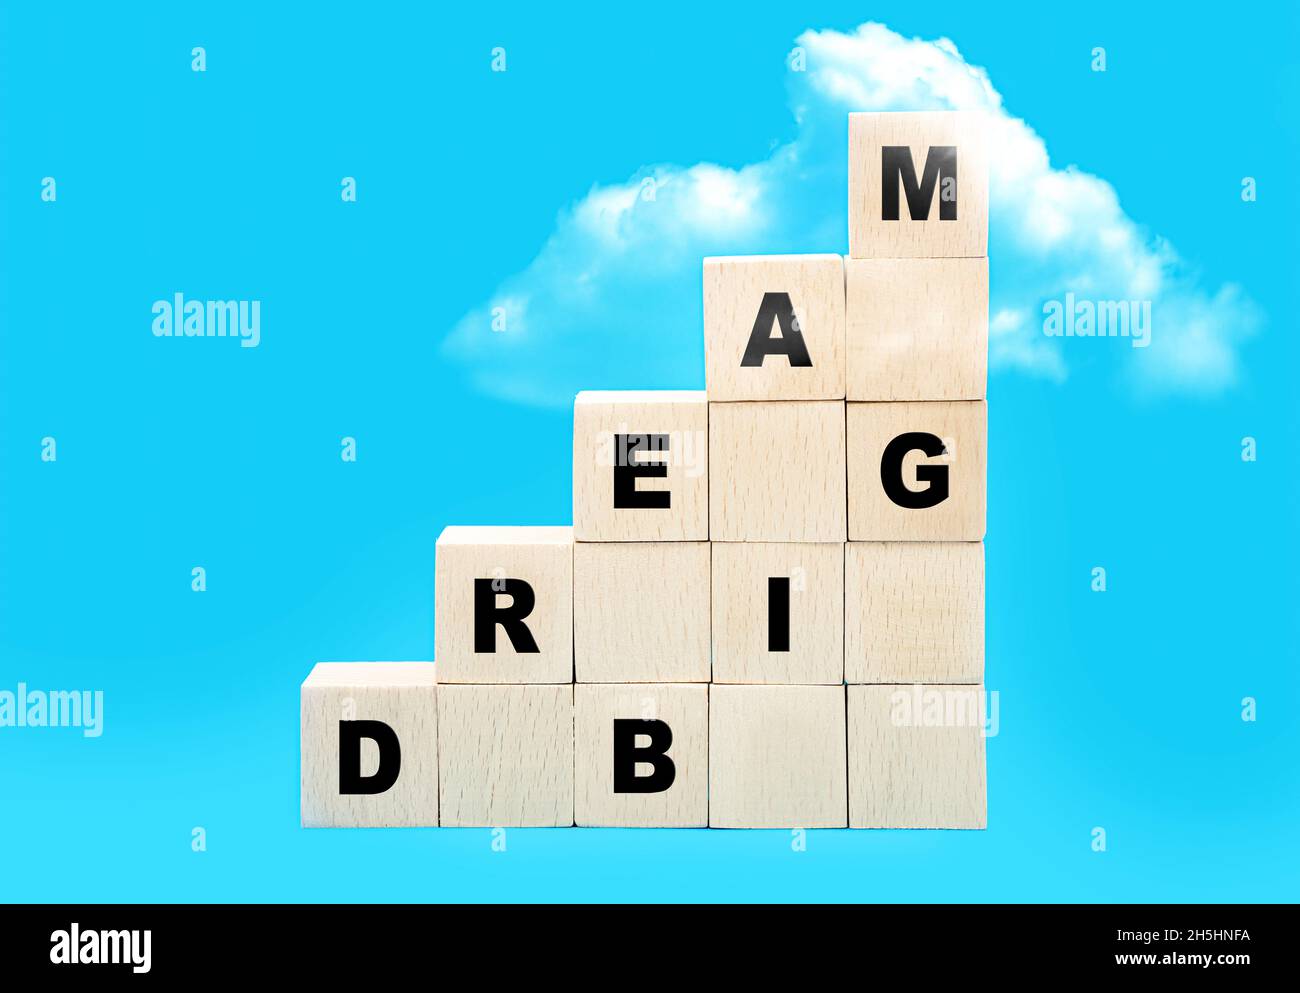 Word DREAM BIG made of wooden toy blocks stacked into stairs leading to the clouds against a blue background. The concept of dreaming big to achieve t Stock Photo